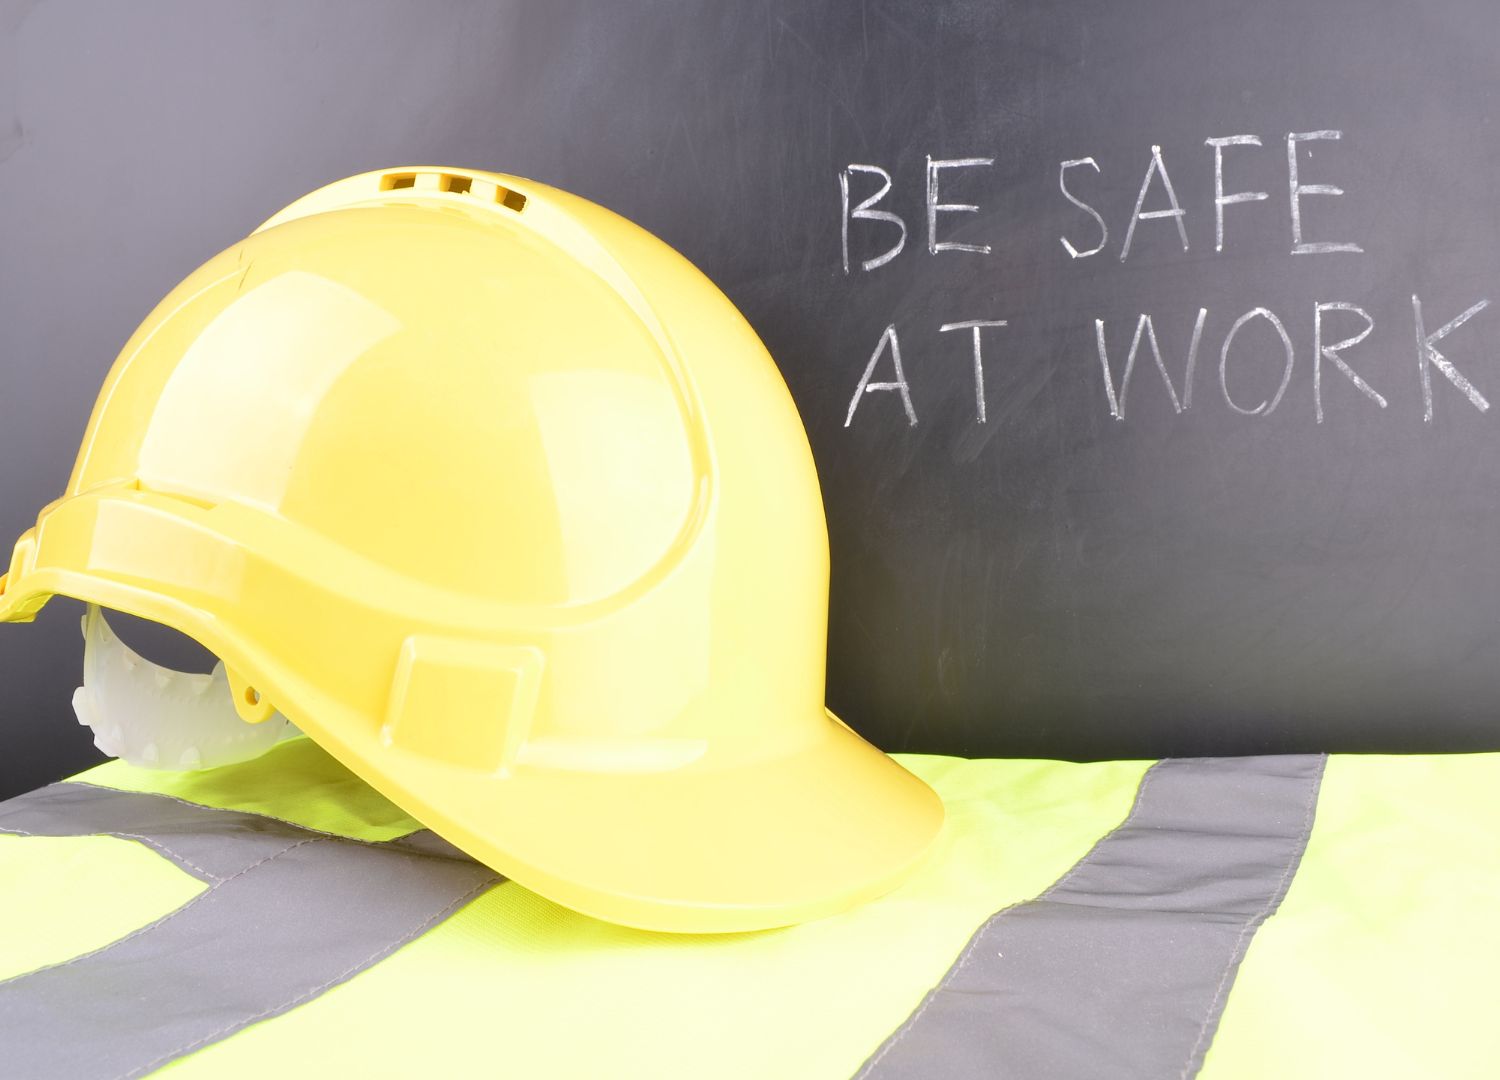 "Promoting safety in workplaces  with technology"